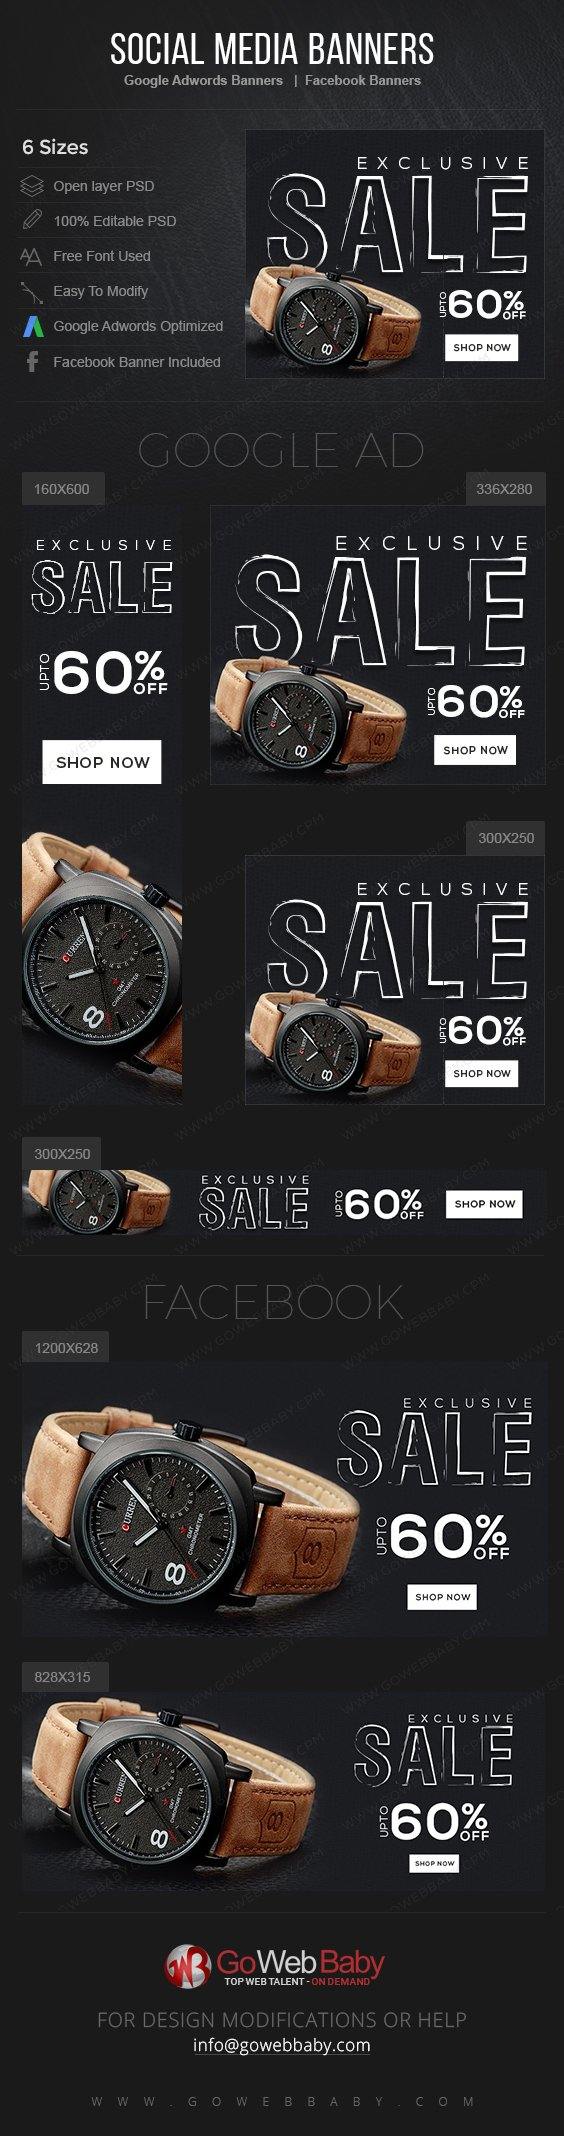 Google Adwords Display Banner With Facebook Banners - Exclusive Watch For Men - GoWebBaby.Com